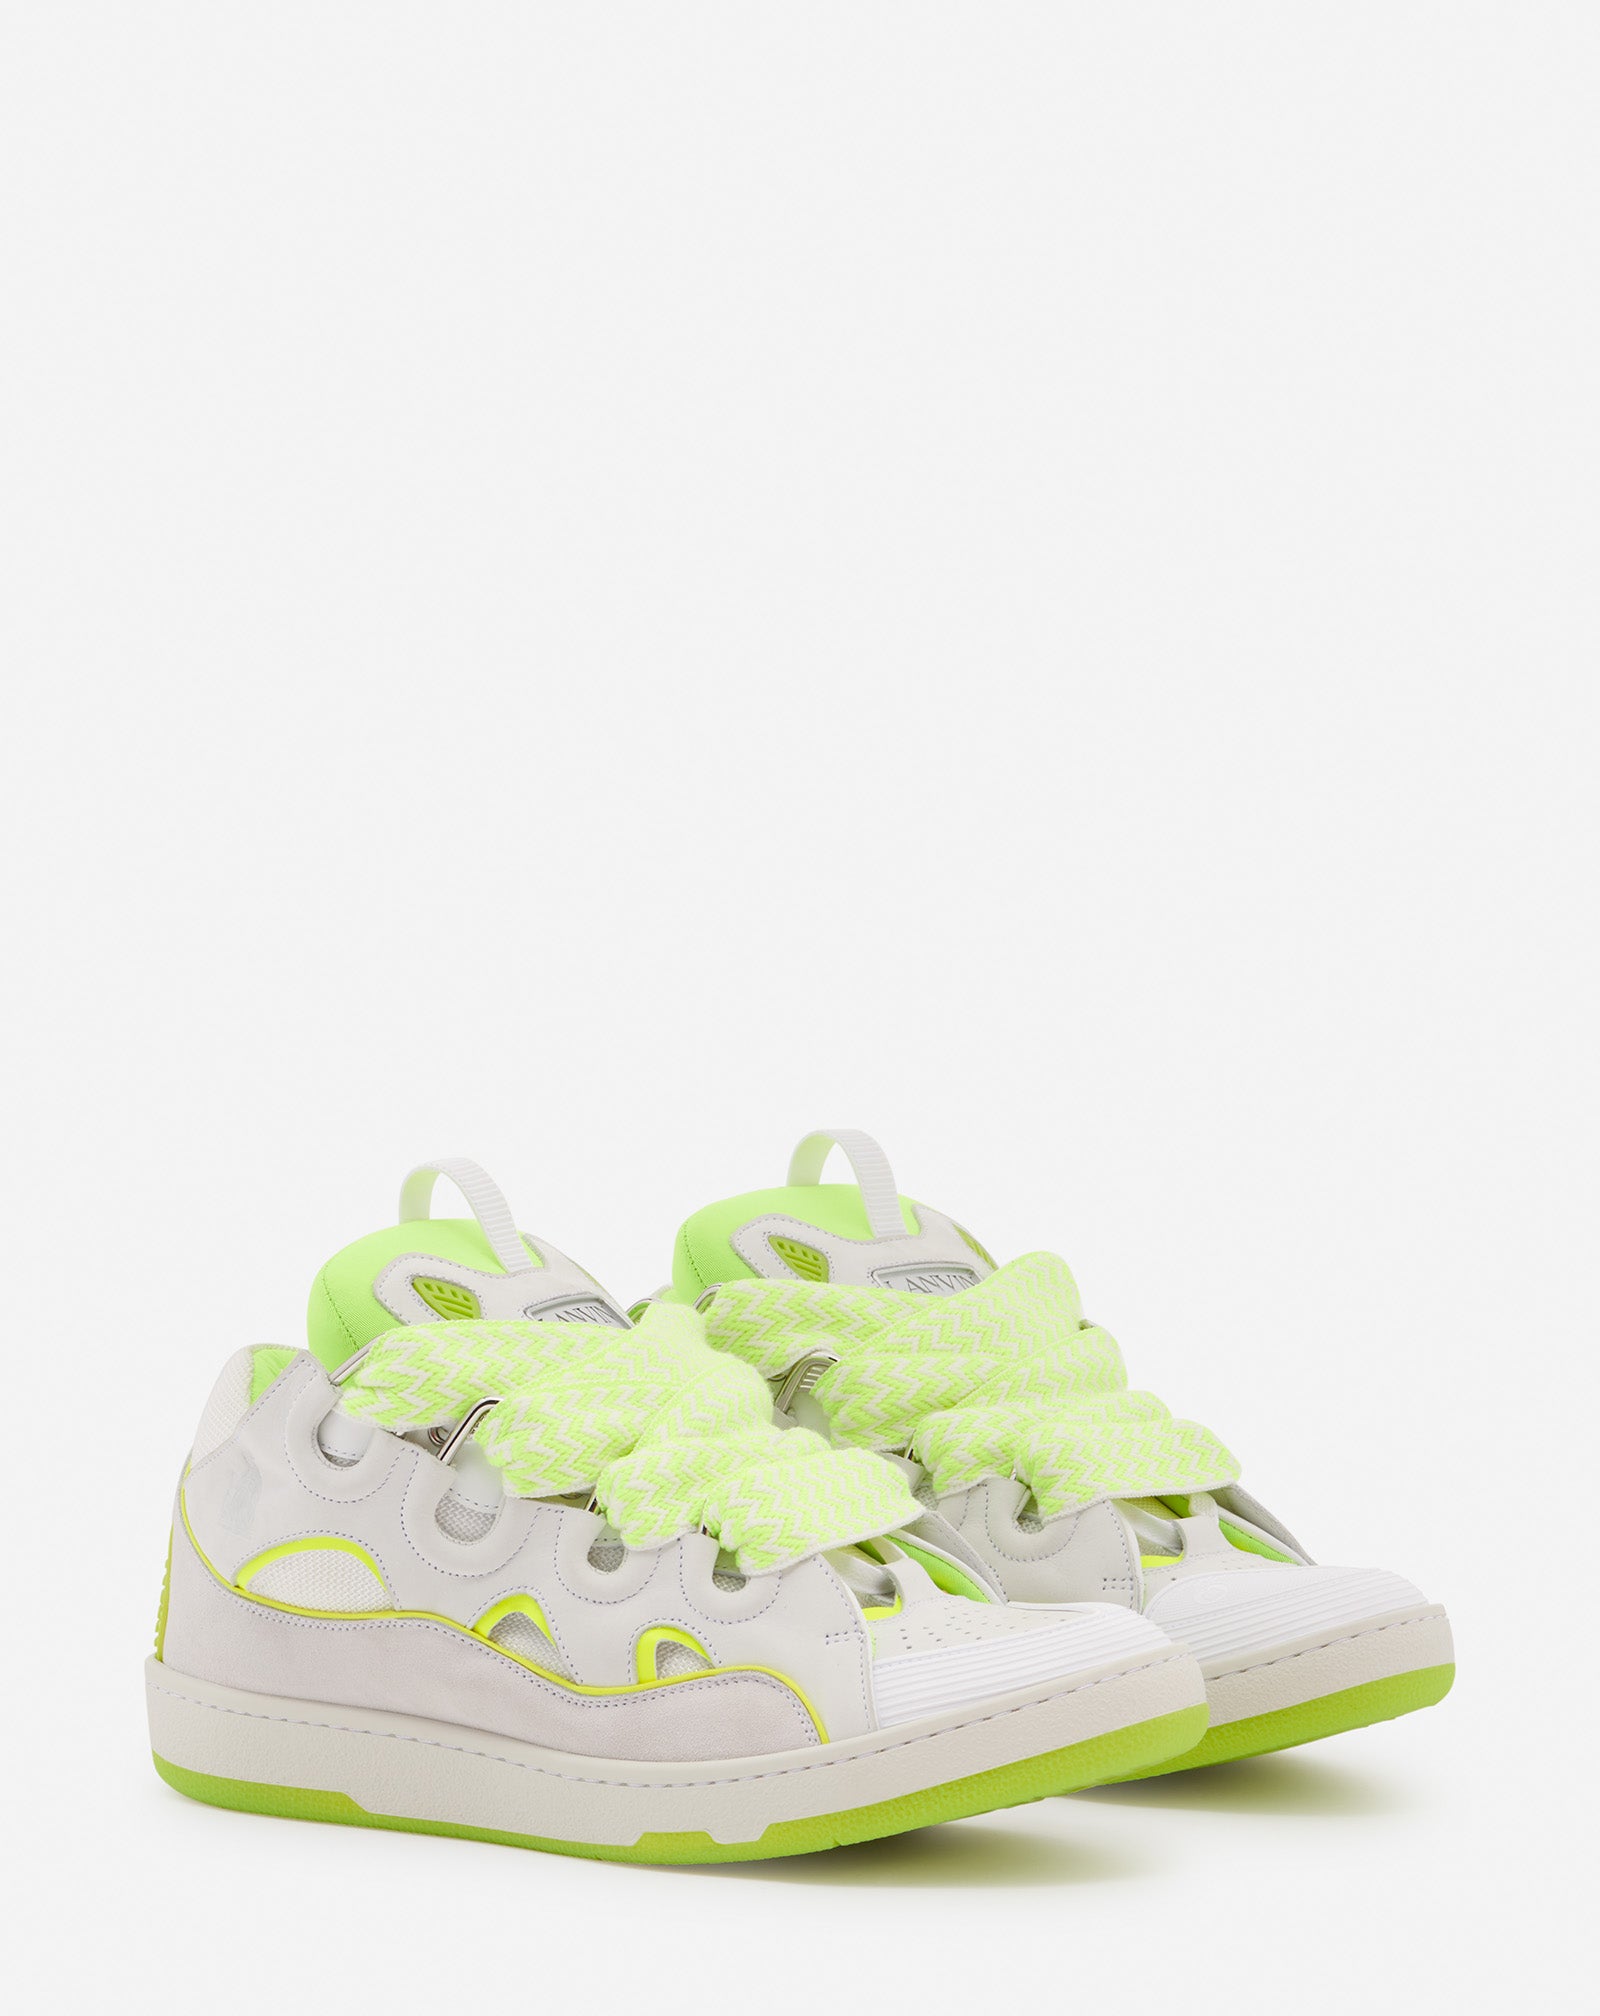 LEATHER CURB SNEAKERS, WHITE/FLUORESCENT YELLOW